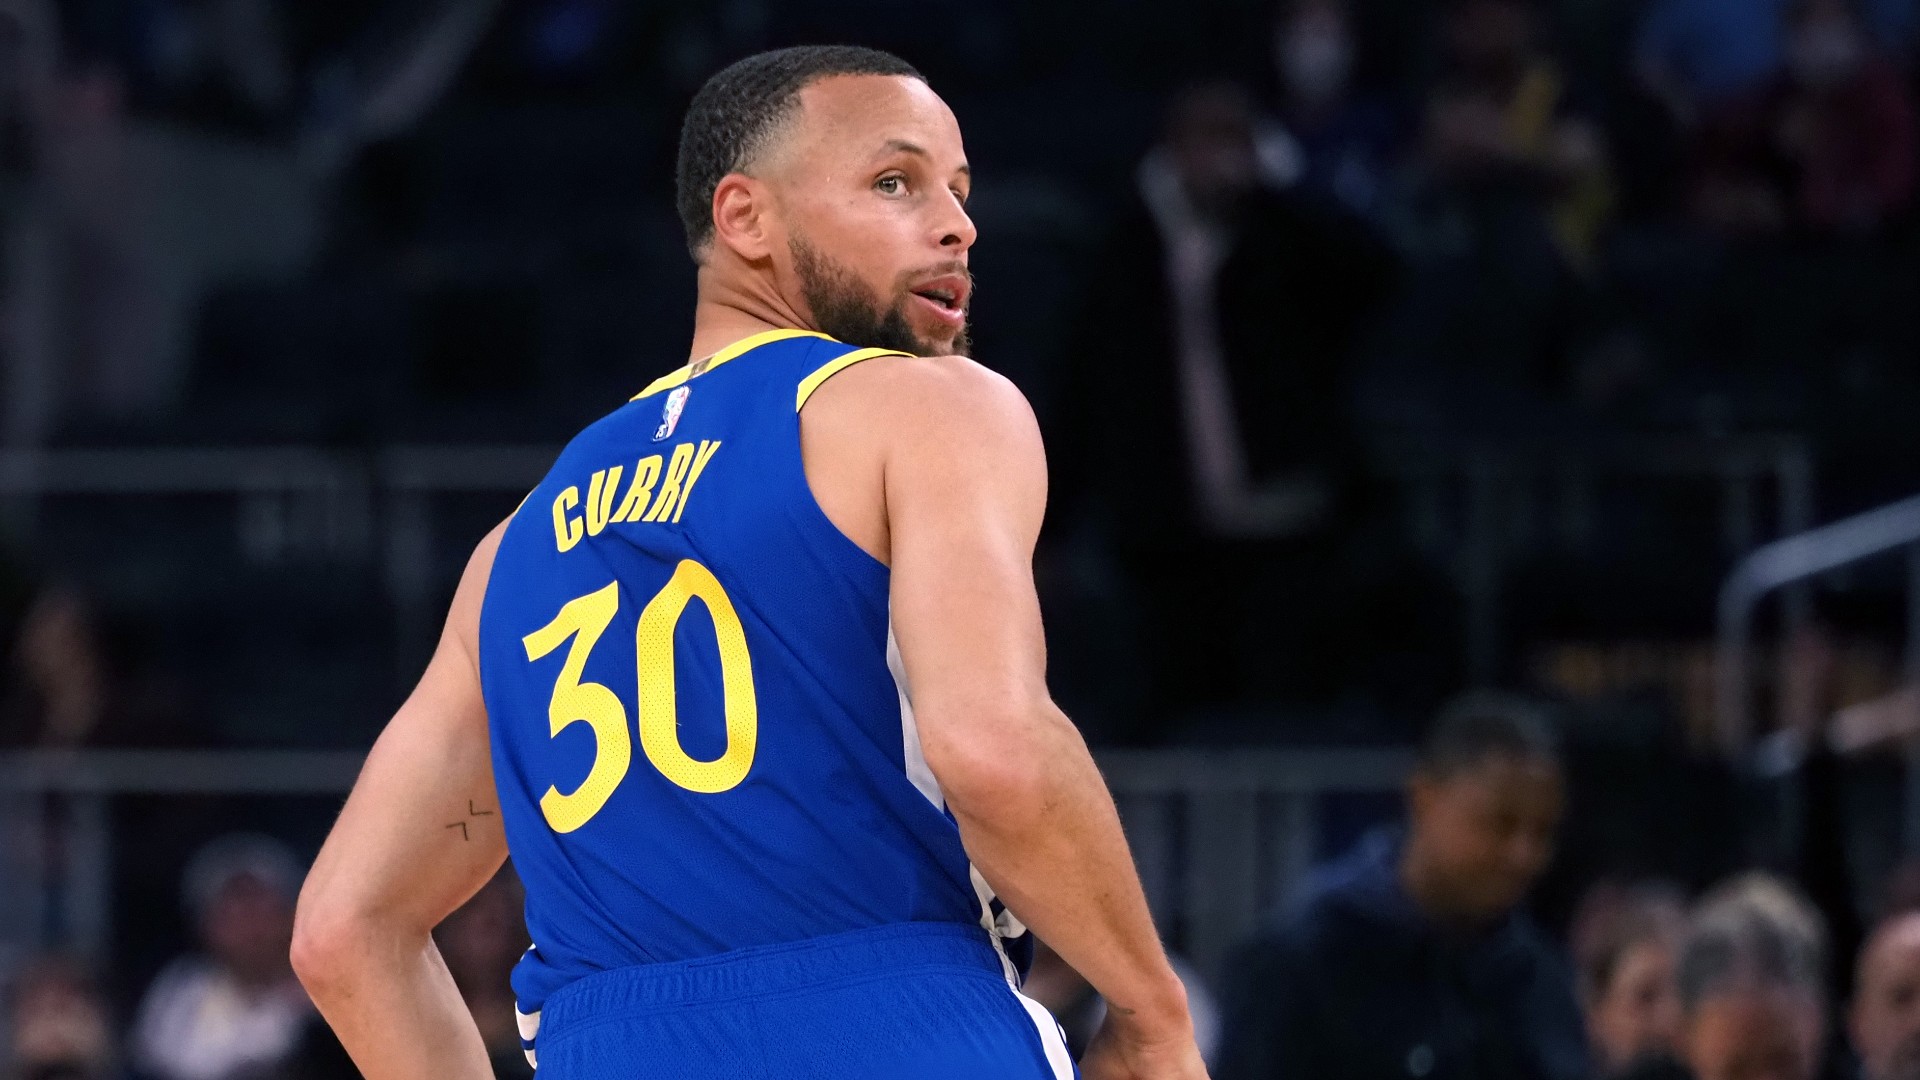 Steph Curry's Warriors jersey is NBA's top seller so far this season, Sports